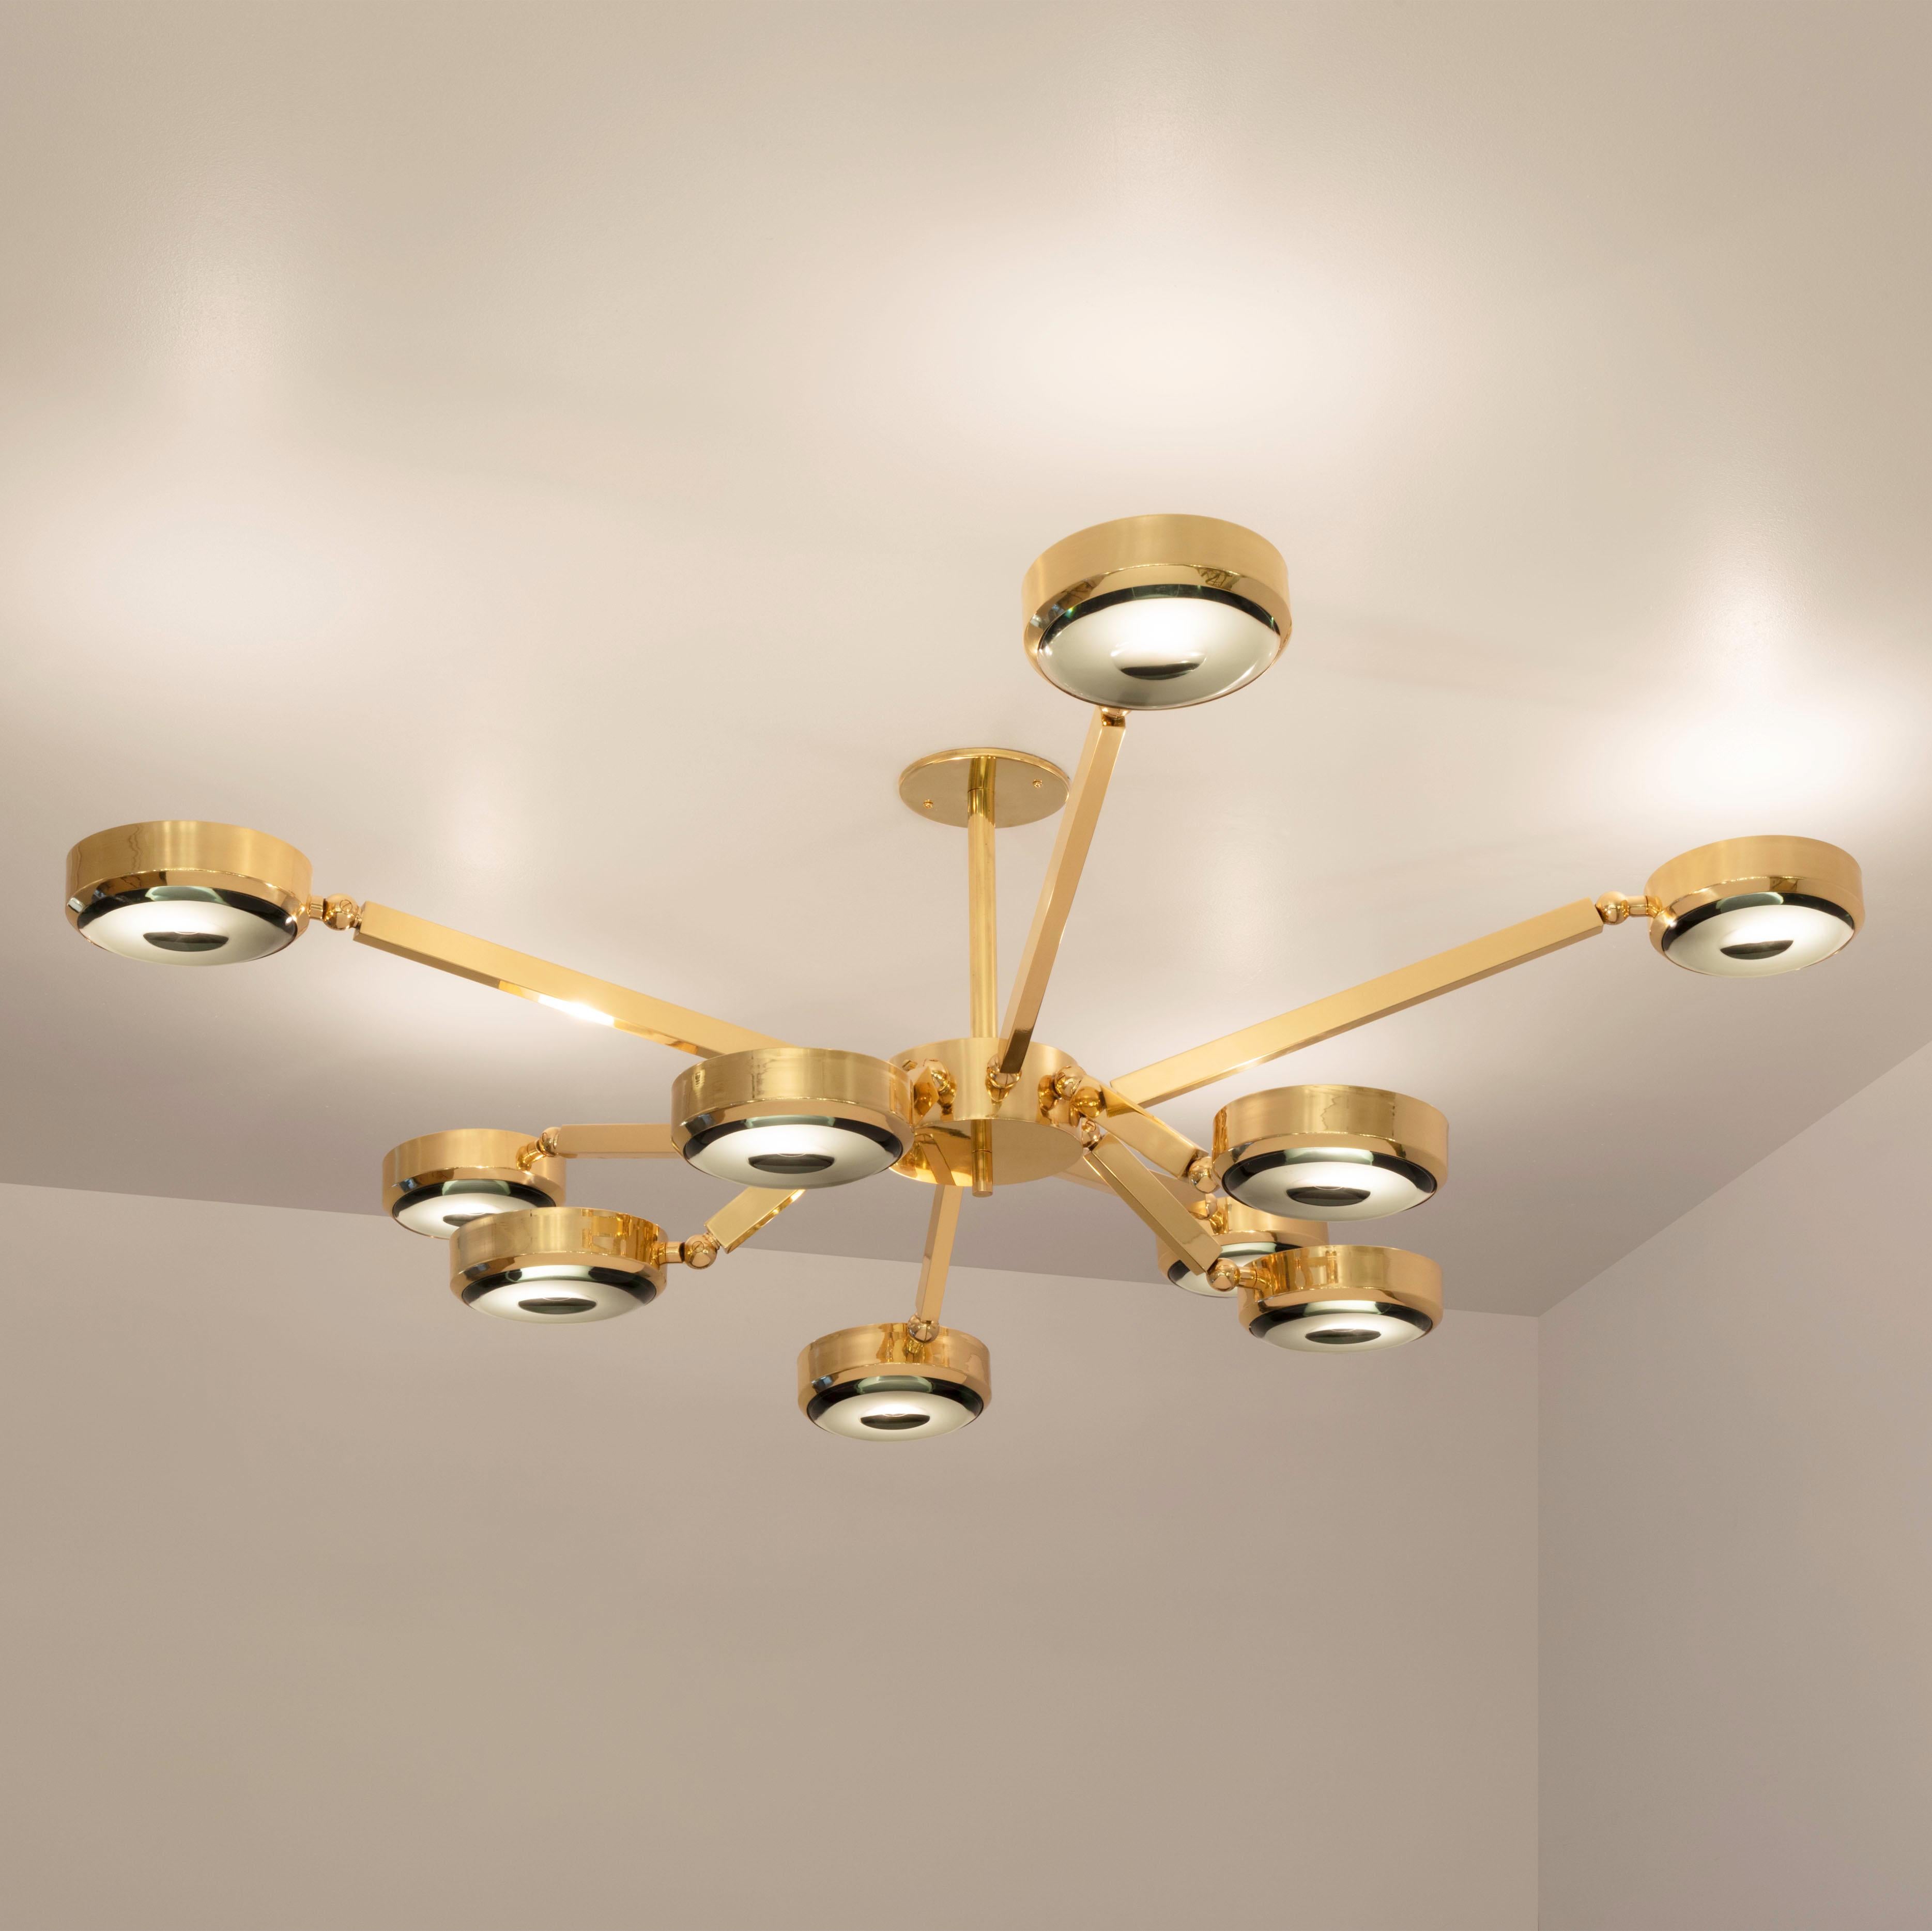 Contemporary Oculus Articulating Ceiling Light-Polished Nickel Finish and Carved Glass For Sale